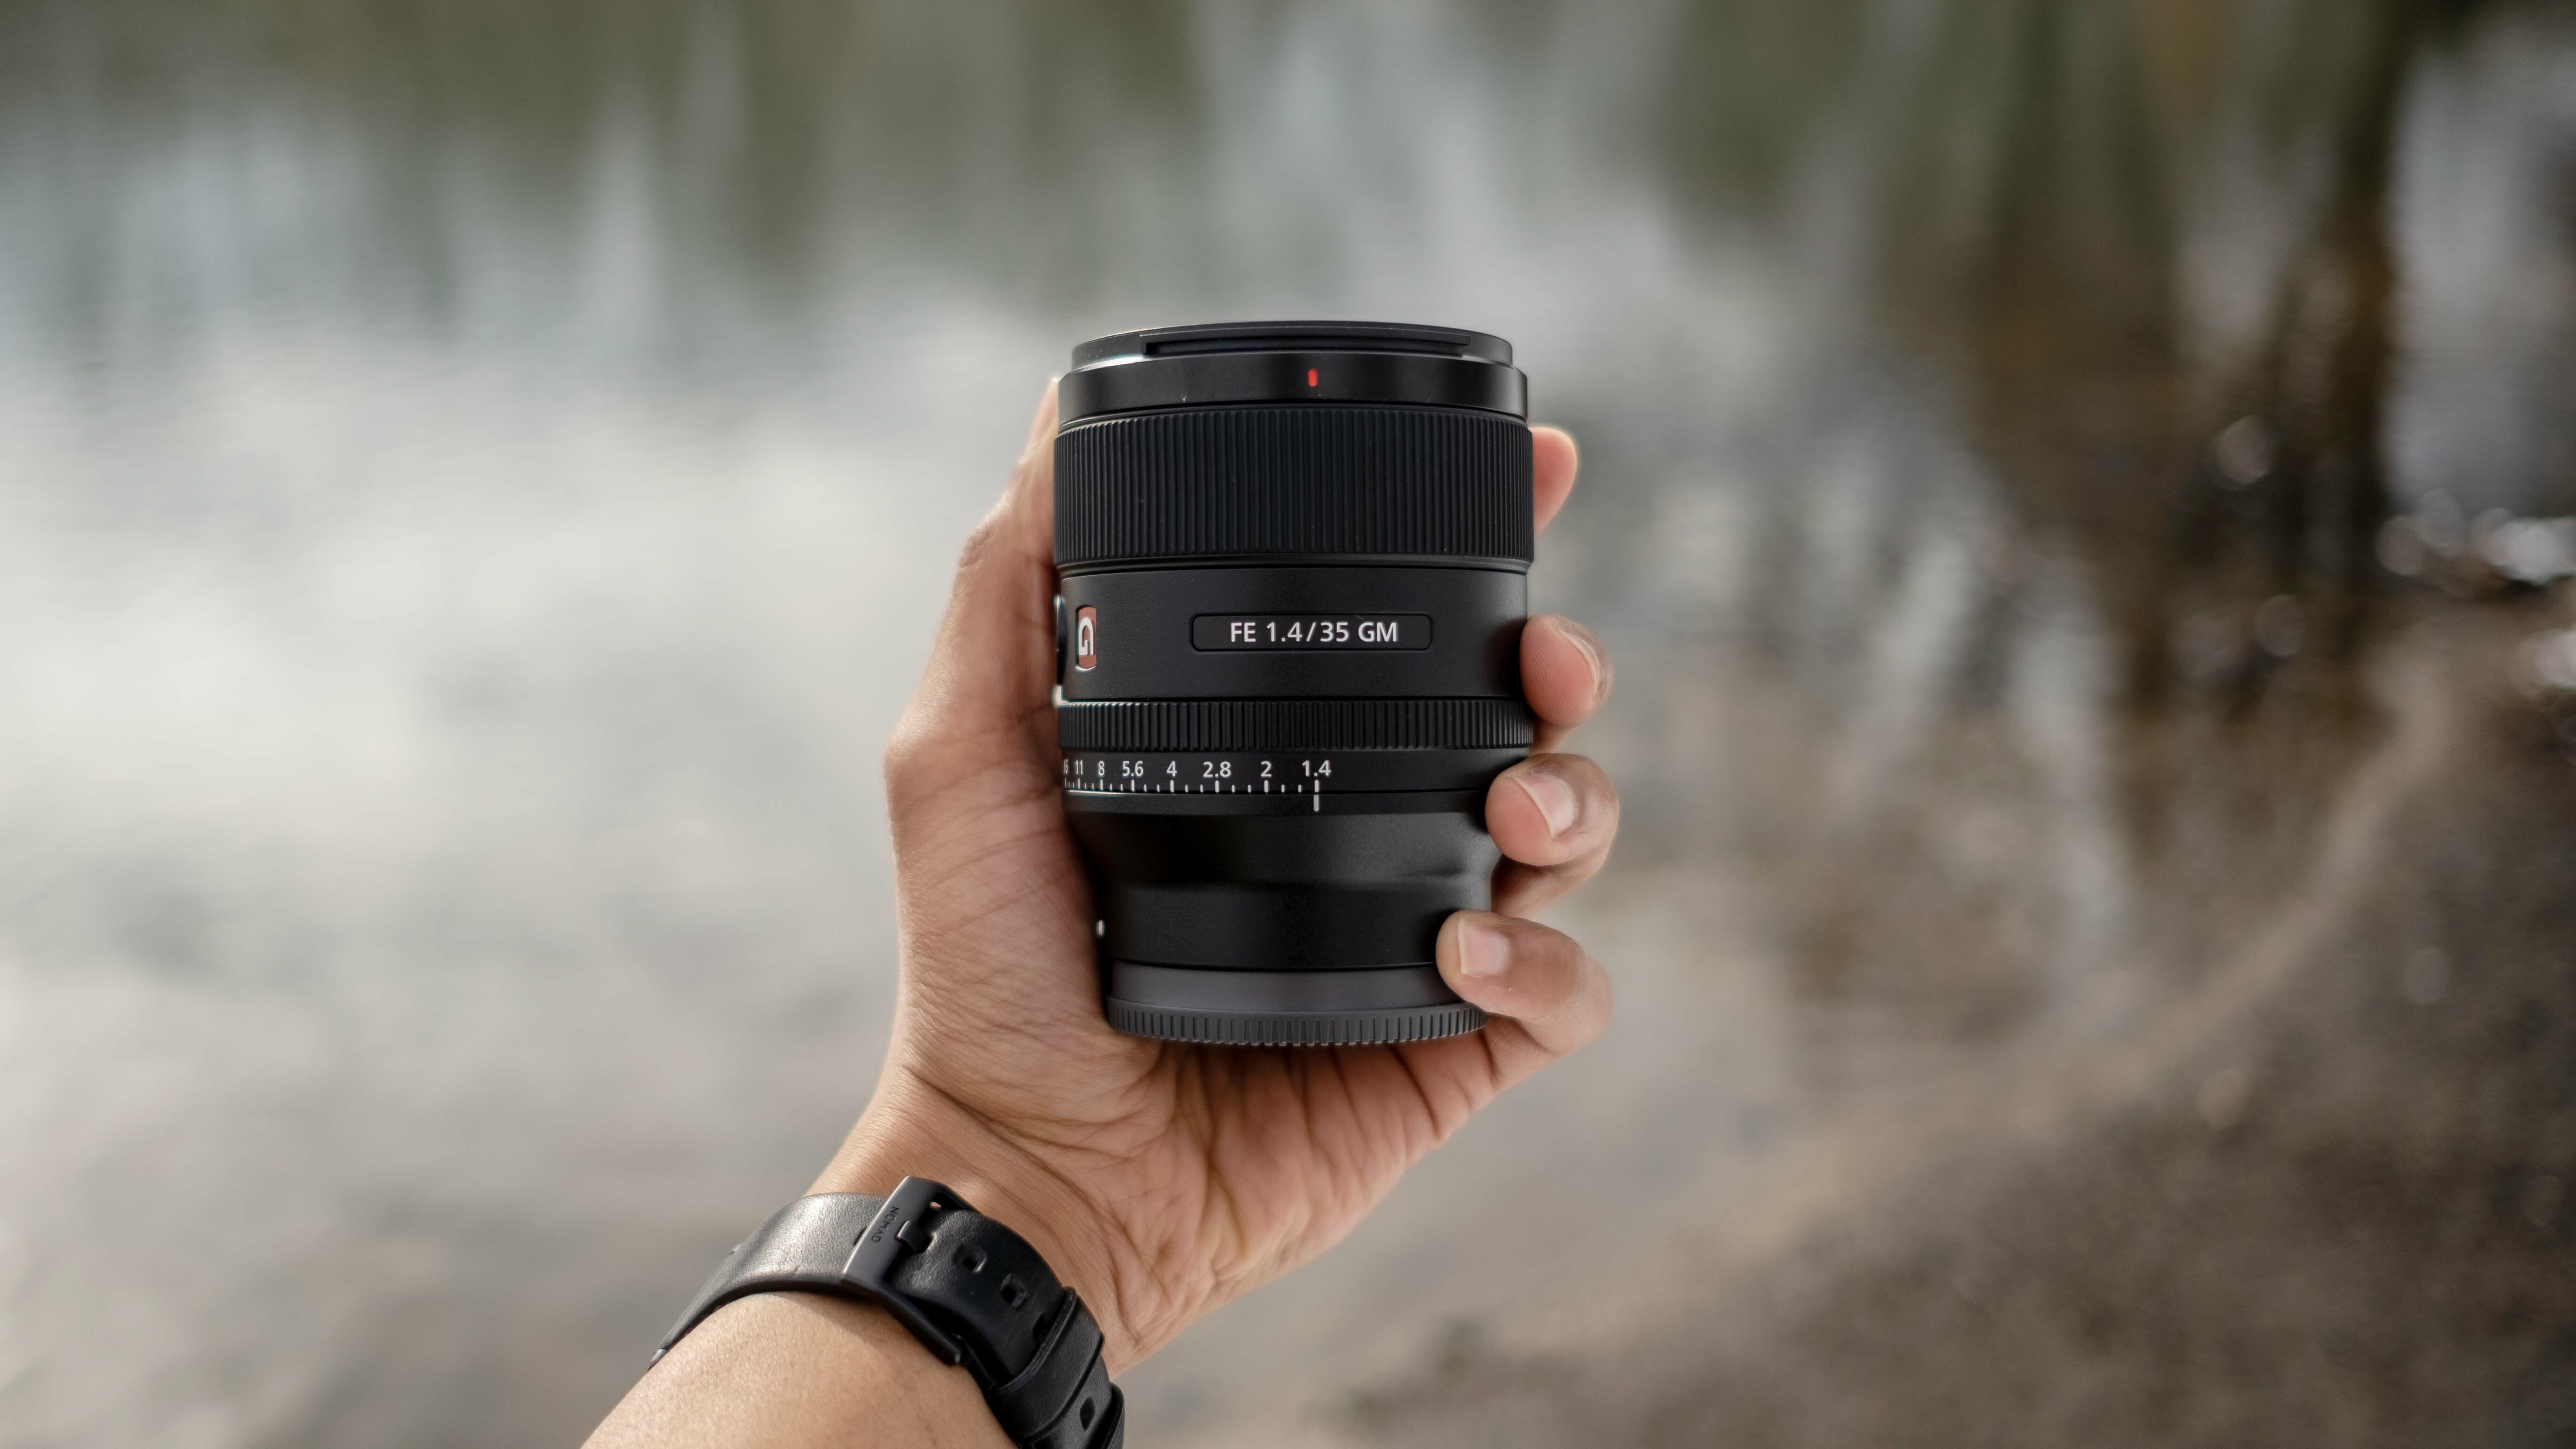 Sneeuwwitje Nevelig Kauwgom The Sony FE 35mm F/1.4 GM Hands-On Review - Moment